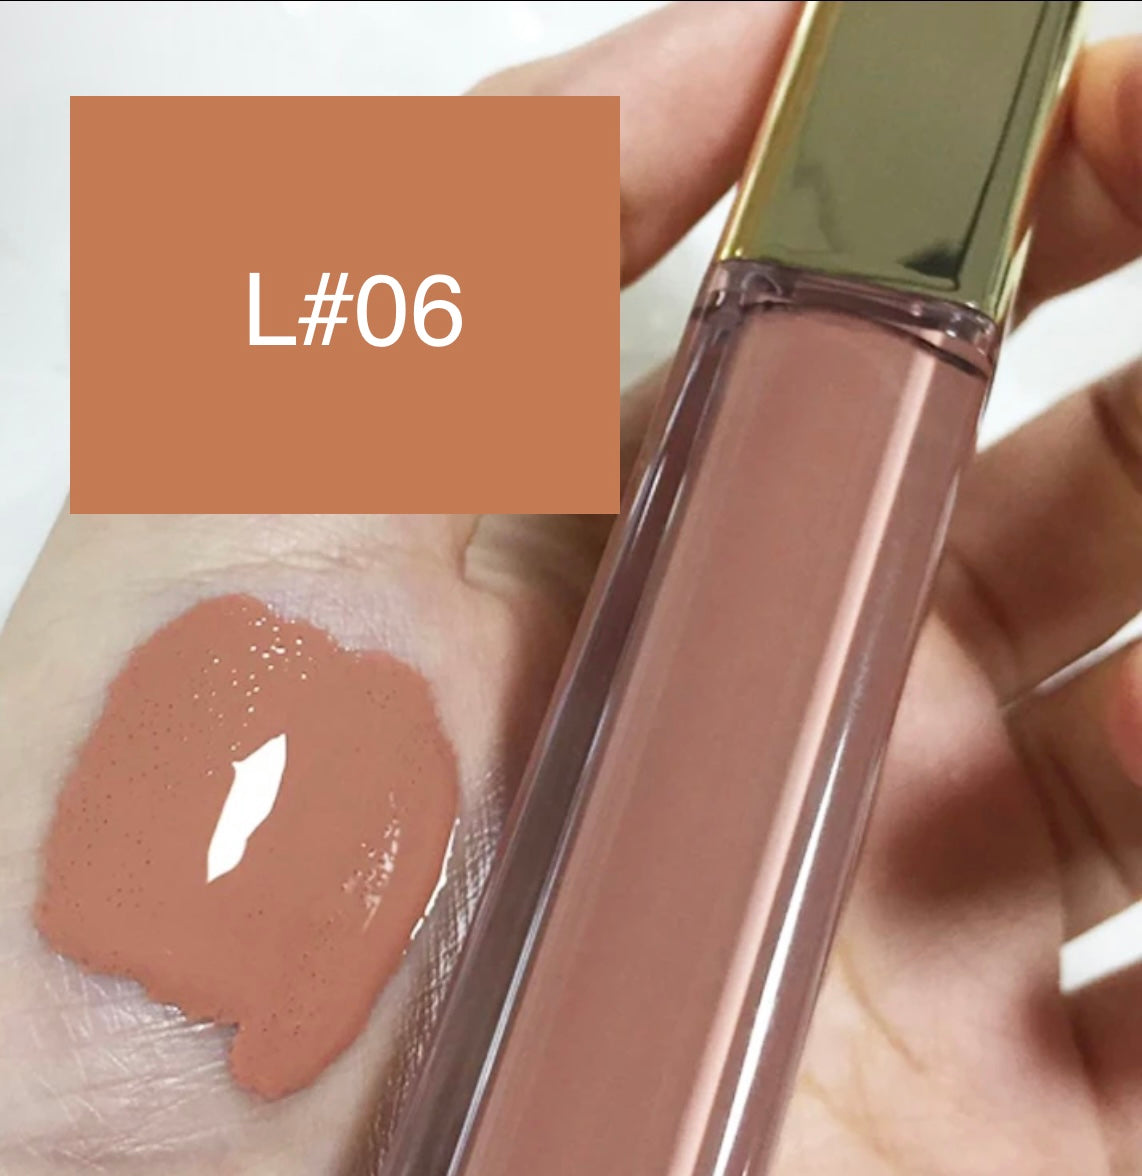 High-Shine Vegan Lip Gloss in variant of L06, providing a vibrant L06 with a glossy shine